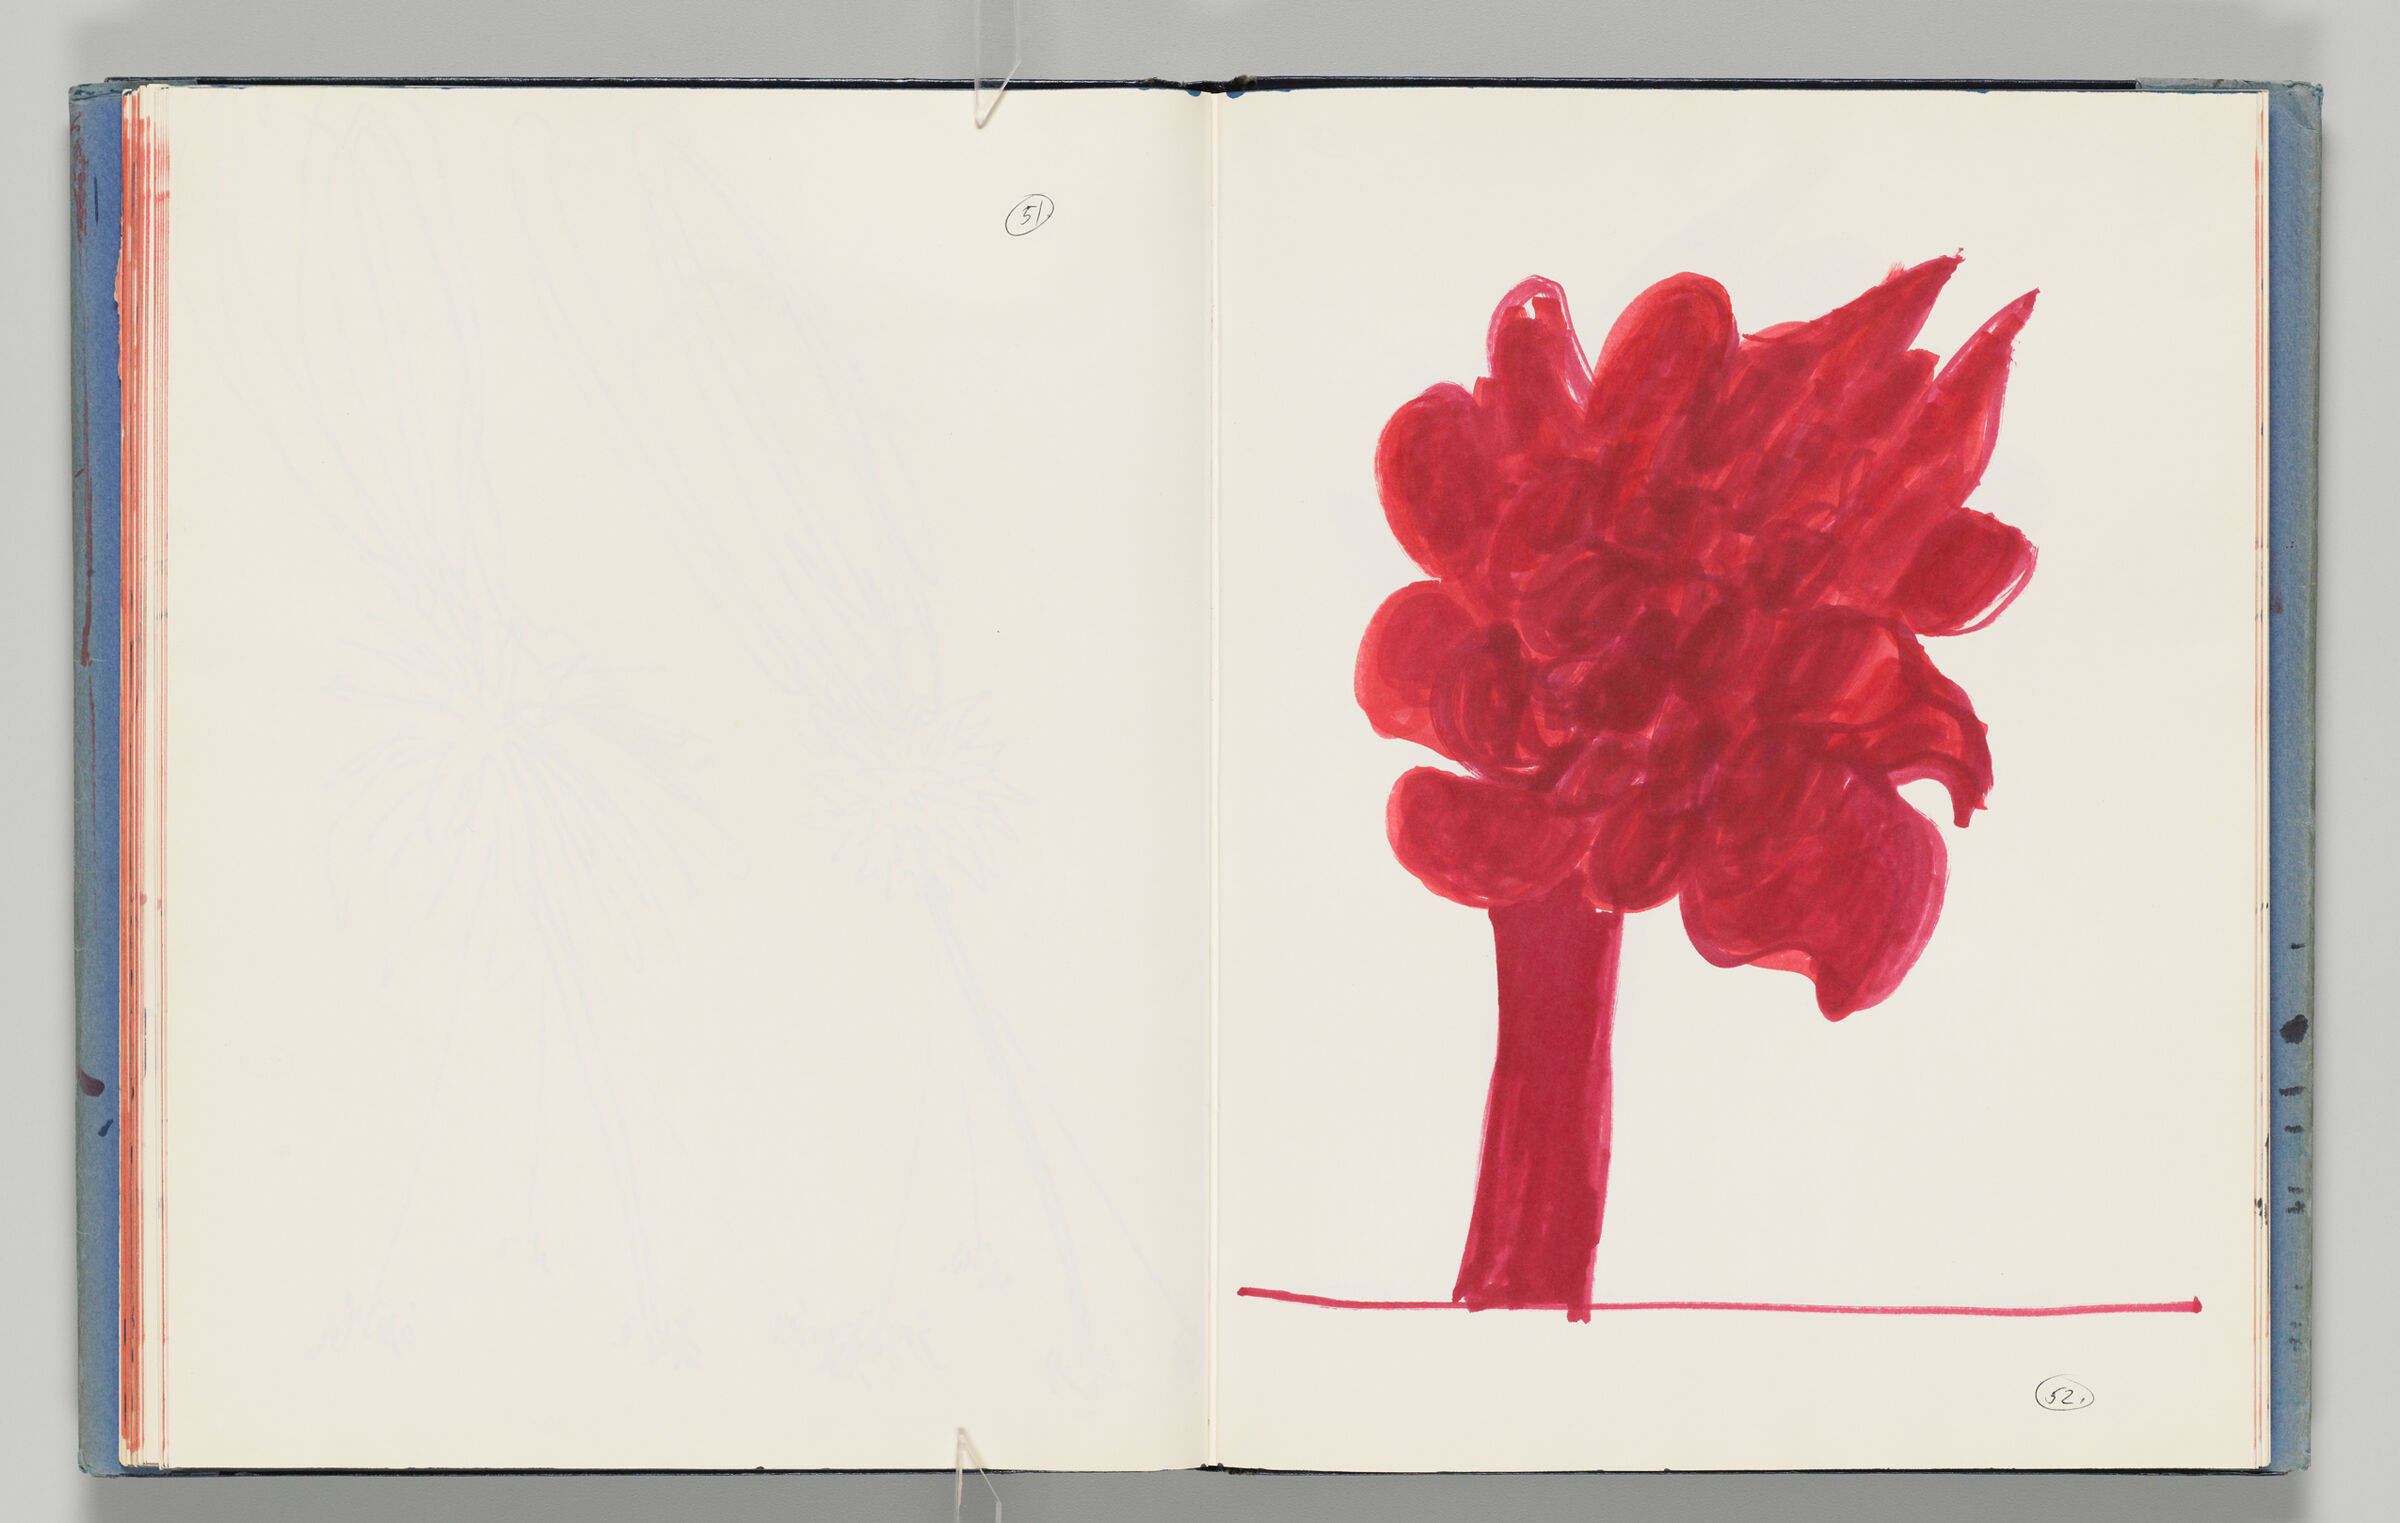 Untitled (Blank With Page Number, Left Page); Untitled (Design For 